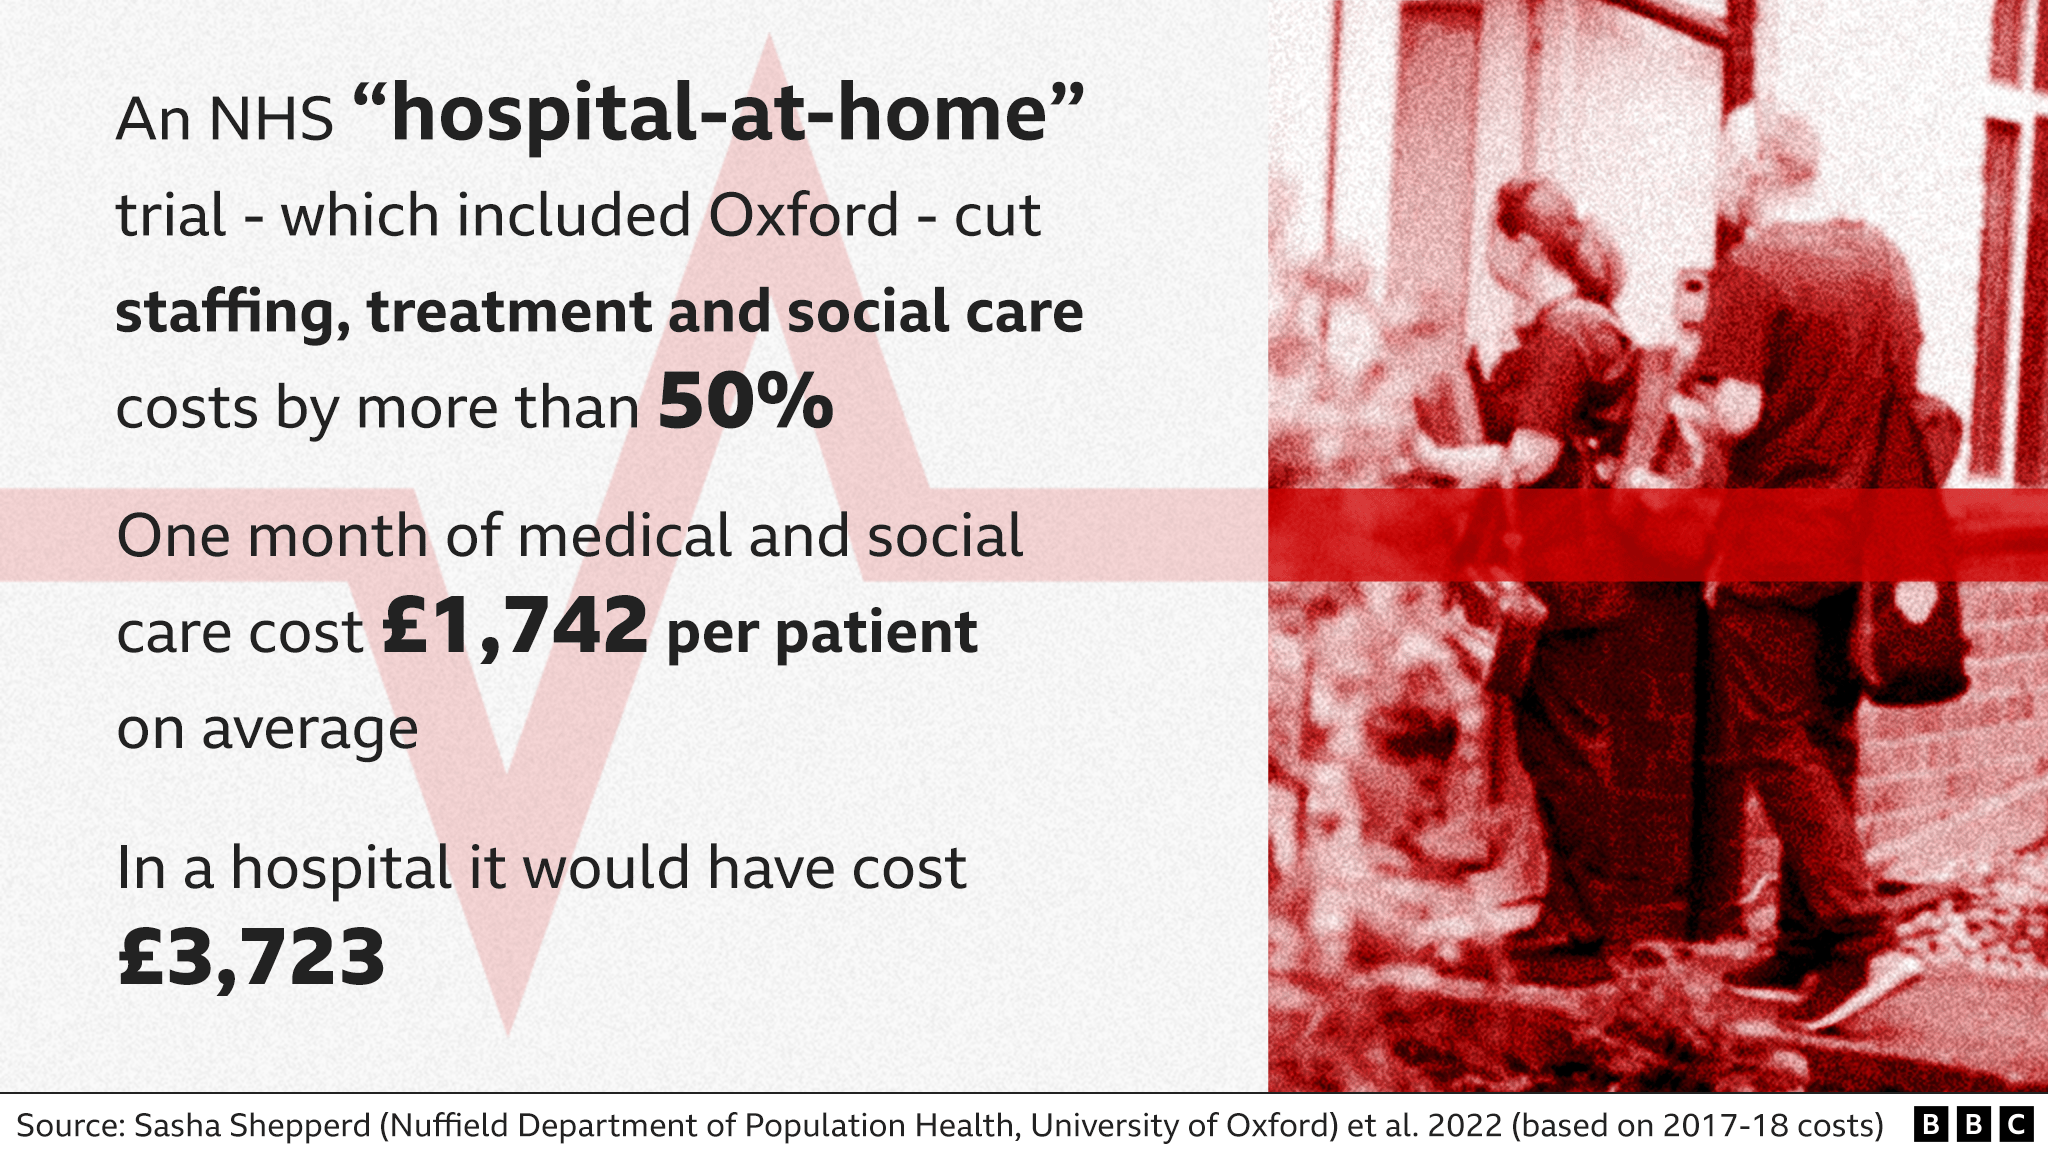 Graphic with wording: An NHS "hospital at home" trial, which included Oxford, cut some costs by more than 50%. One month of medical and social care cost £1,742 per patient on average. In hospital it would have cost £3,723. Source: Sasha Shepperd (Nuffield Department of Population Health, University of Oxford) et al.